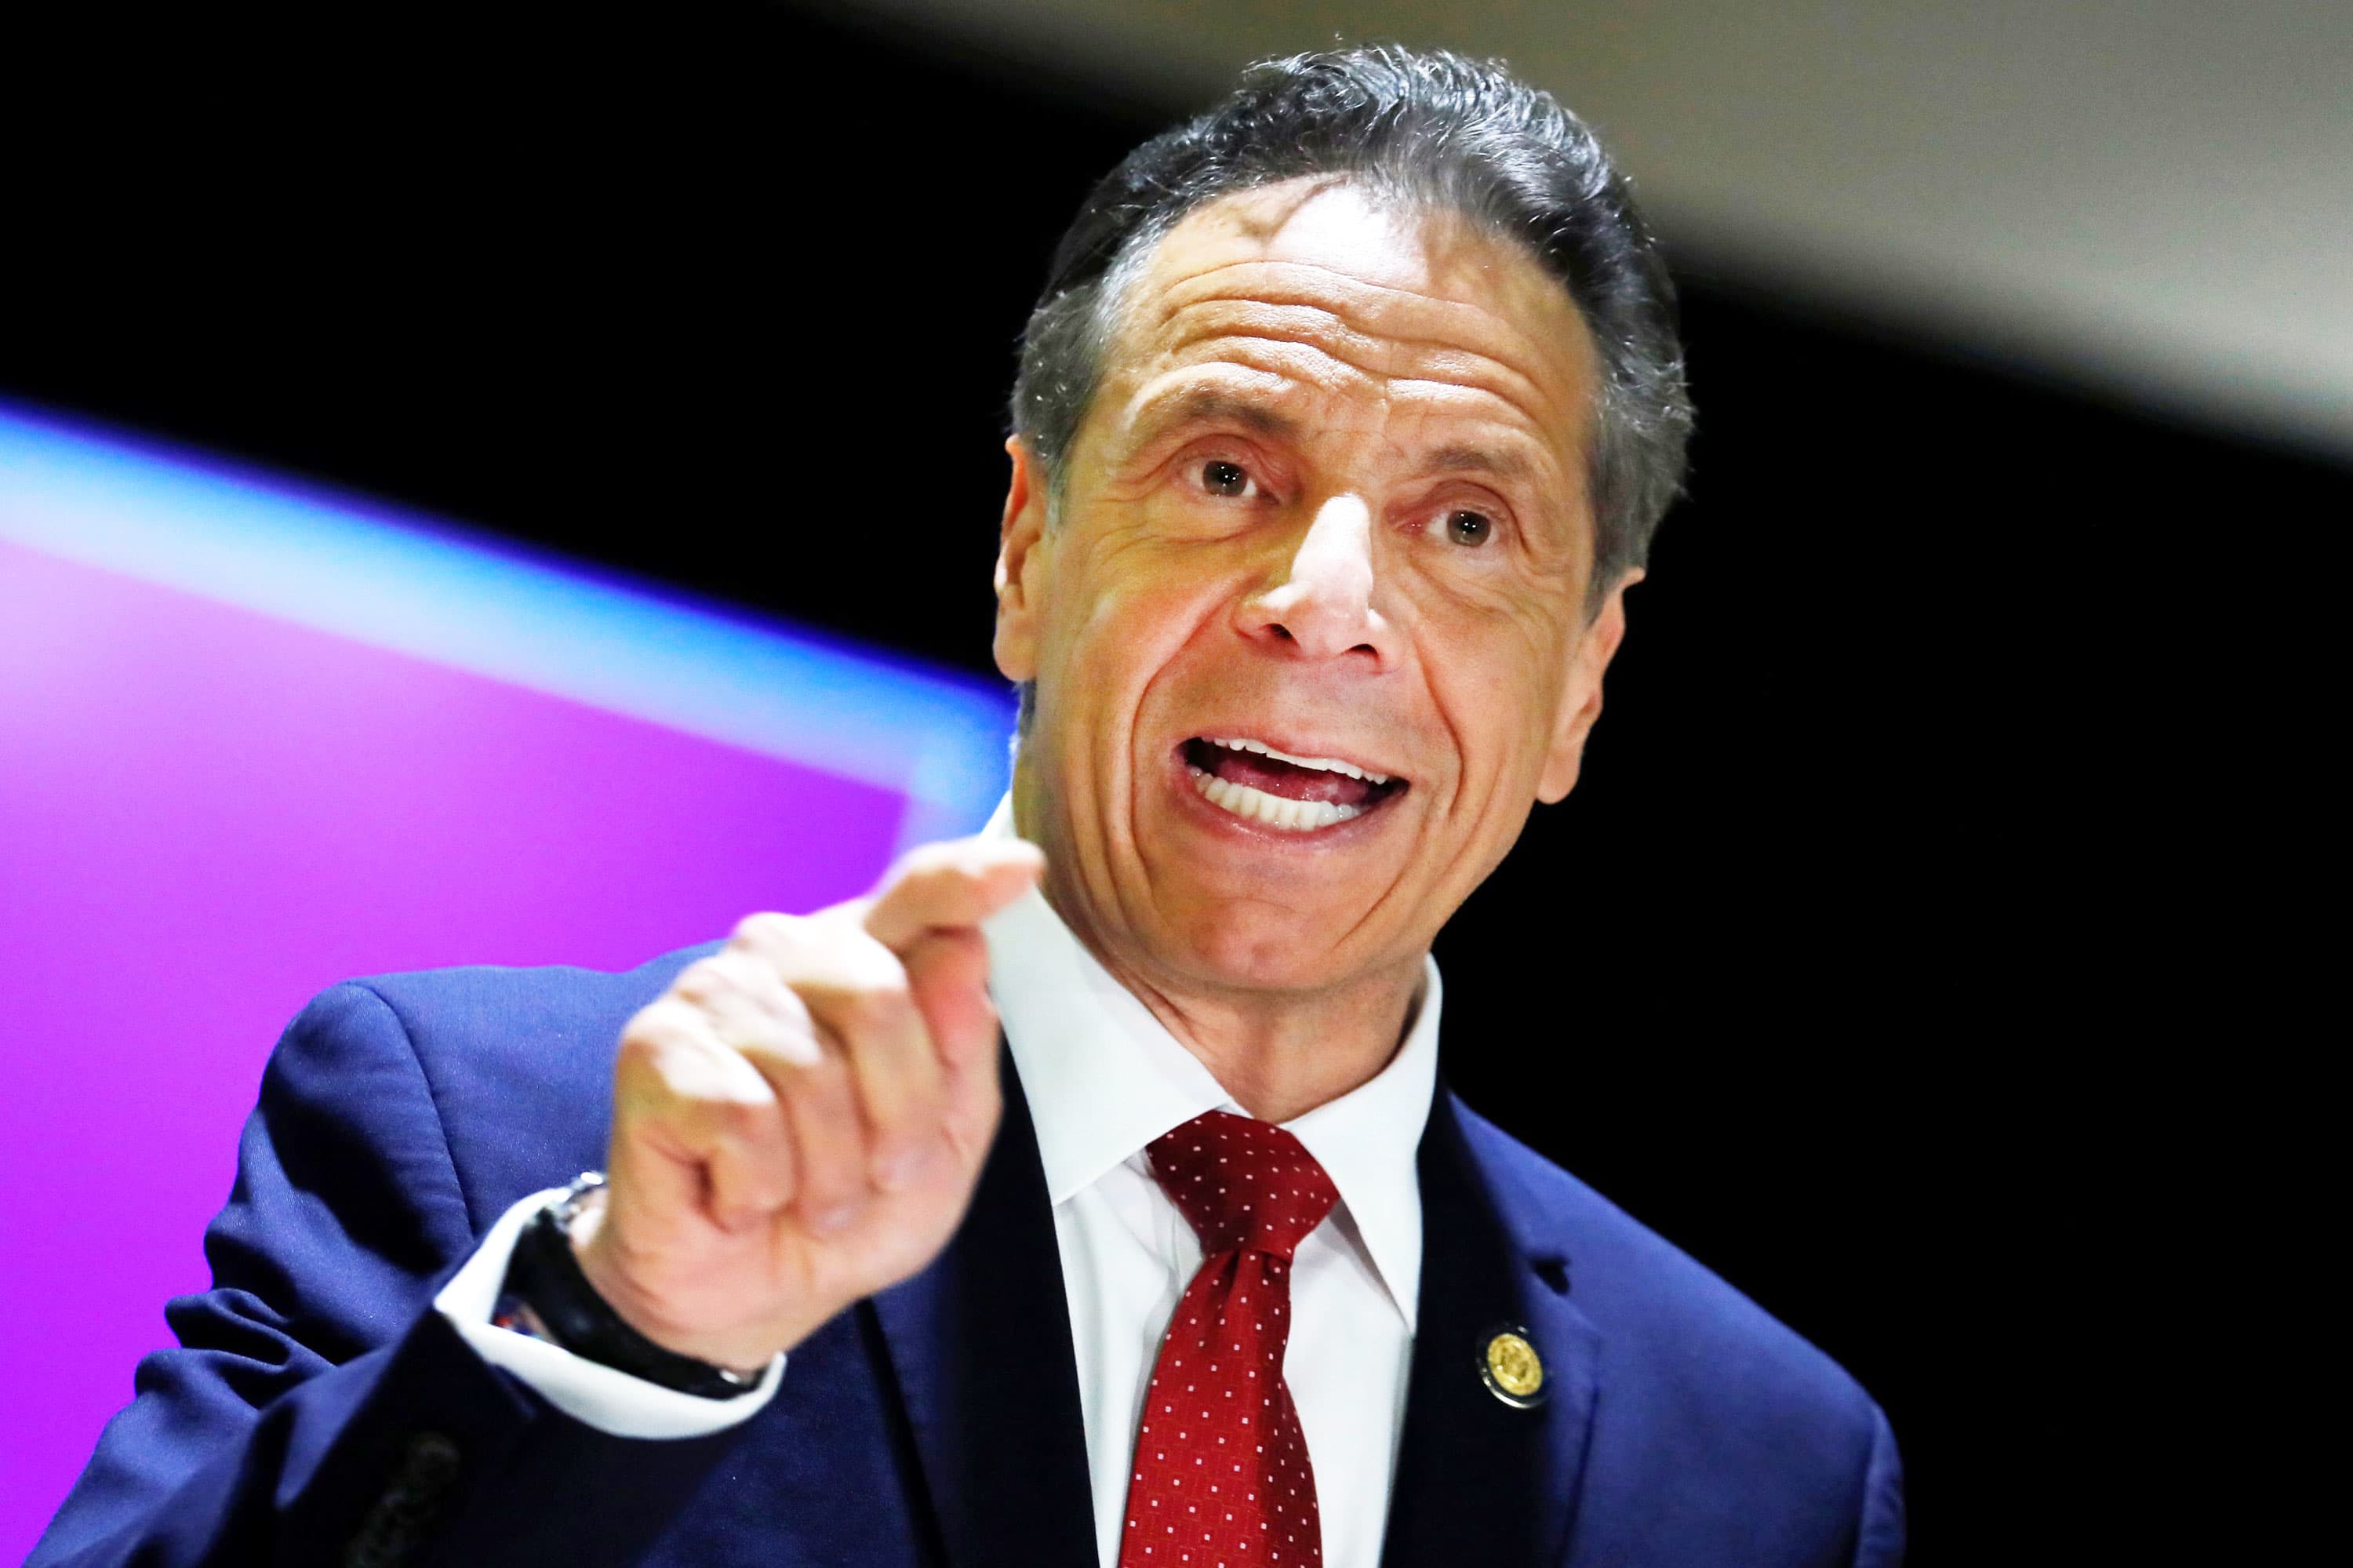 New York Gov. Cuomo asks private businesses to require Covid vaccination for adm..